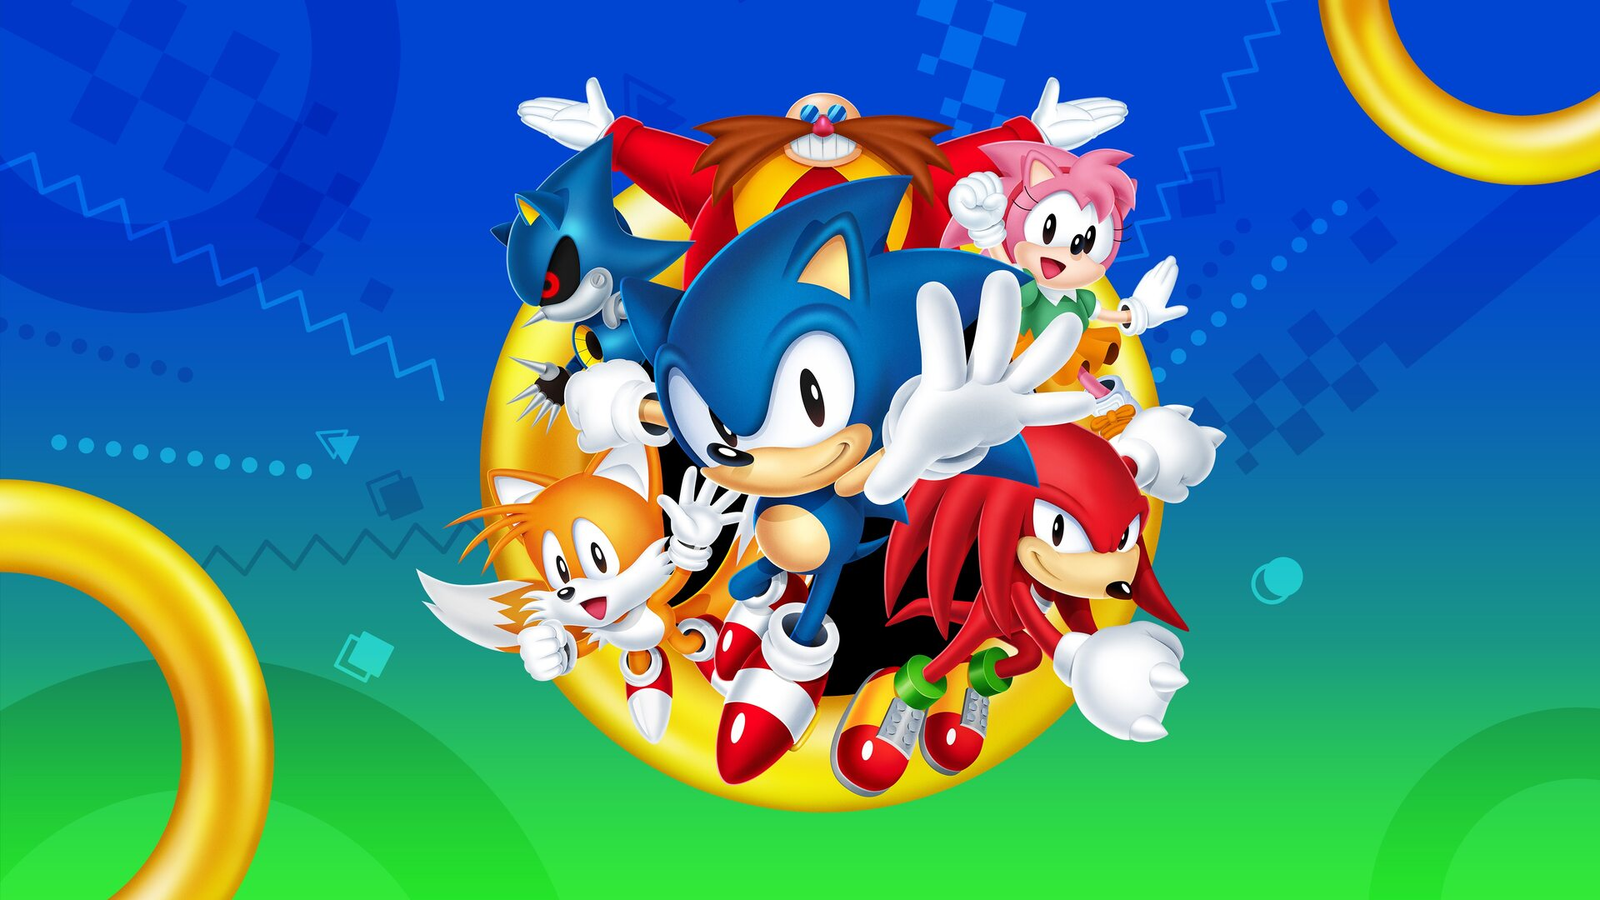 The extra content for the physical version of sonic origins plus